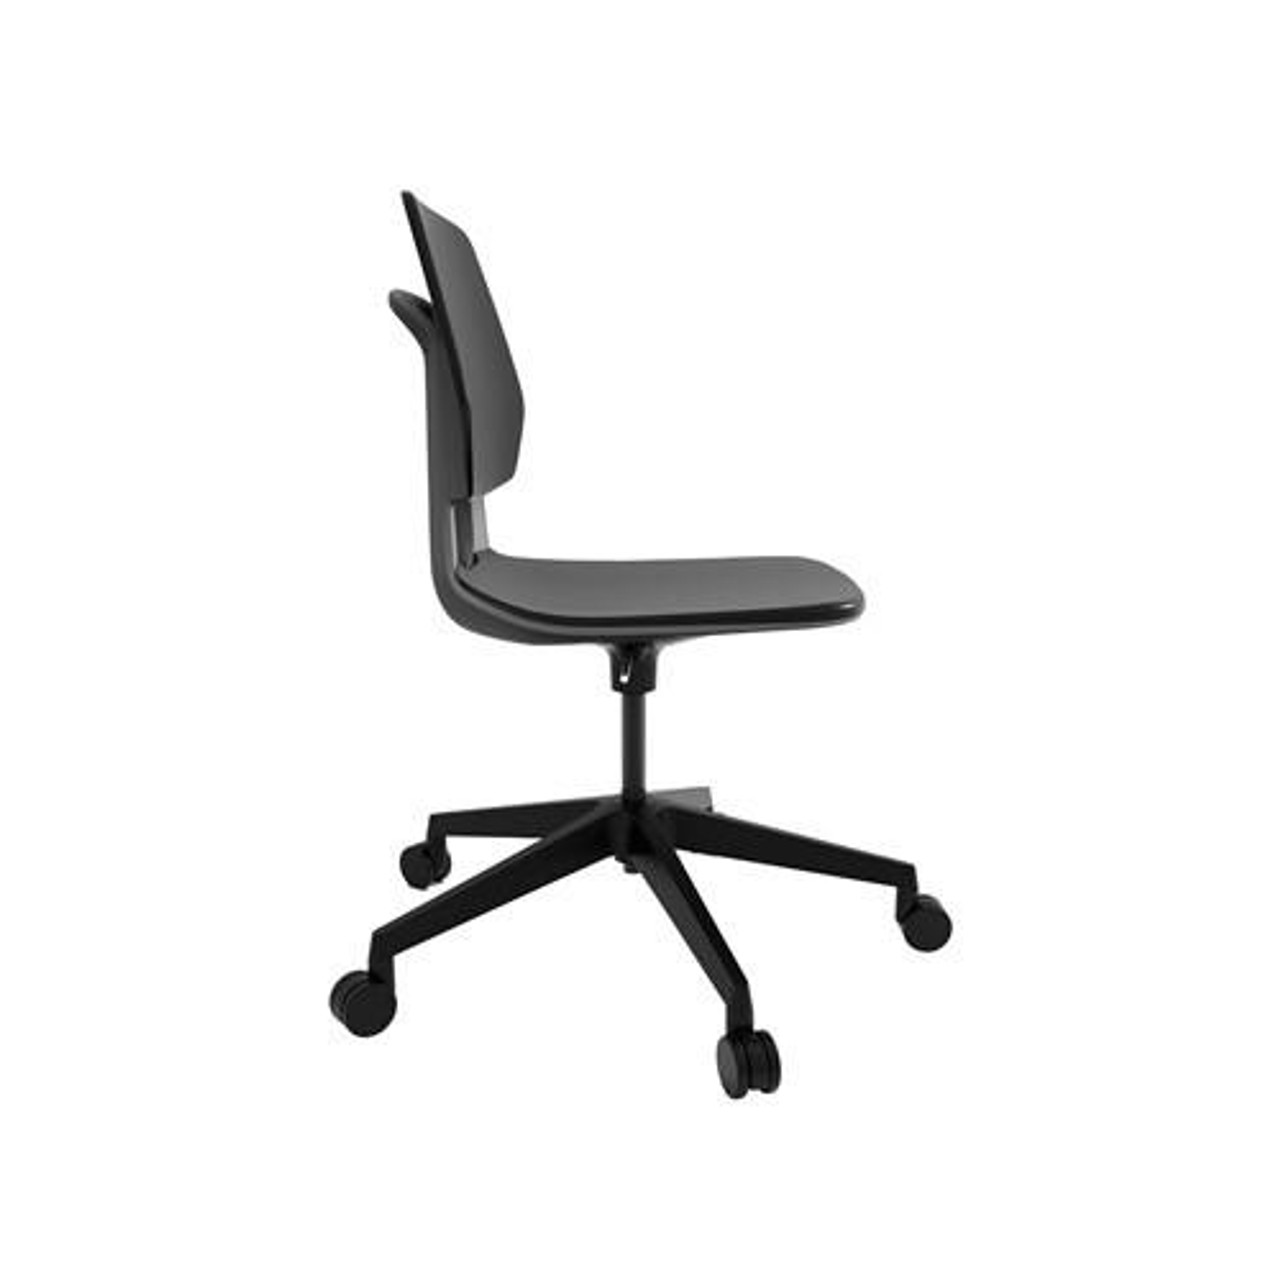 https://cdn11.bigcommerce.com/s-i16nt17fuj/images/stencil/1280x1280/products/10448/39706/safco-products-safco-commute-black-poly-easy-clean-task-chair-with-gray-back-handle-7825__57694.1700321486.jpg?c=2